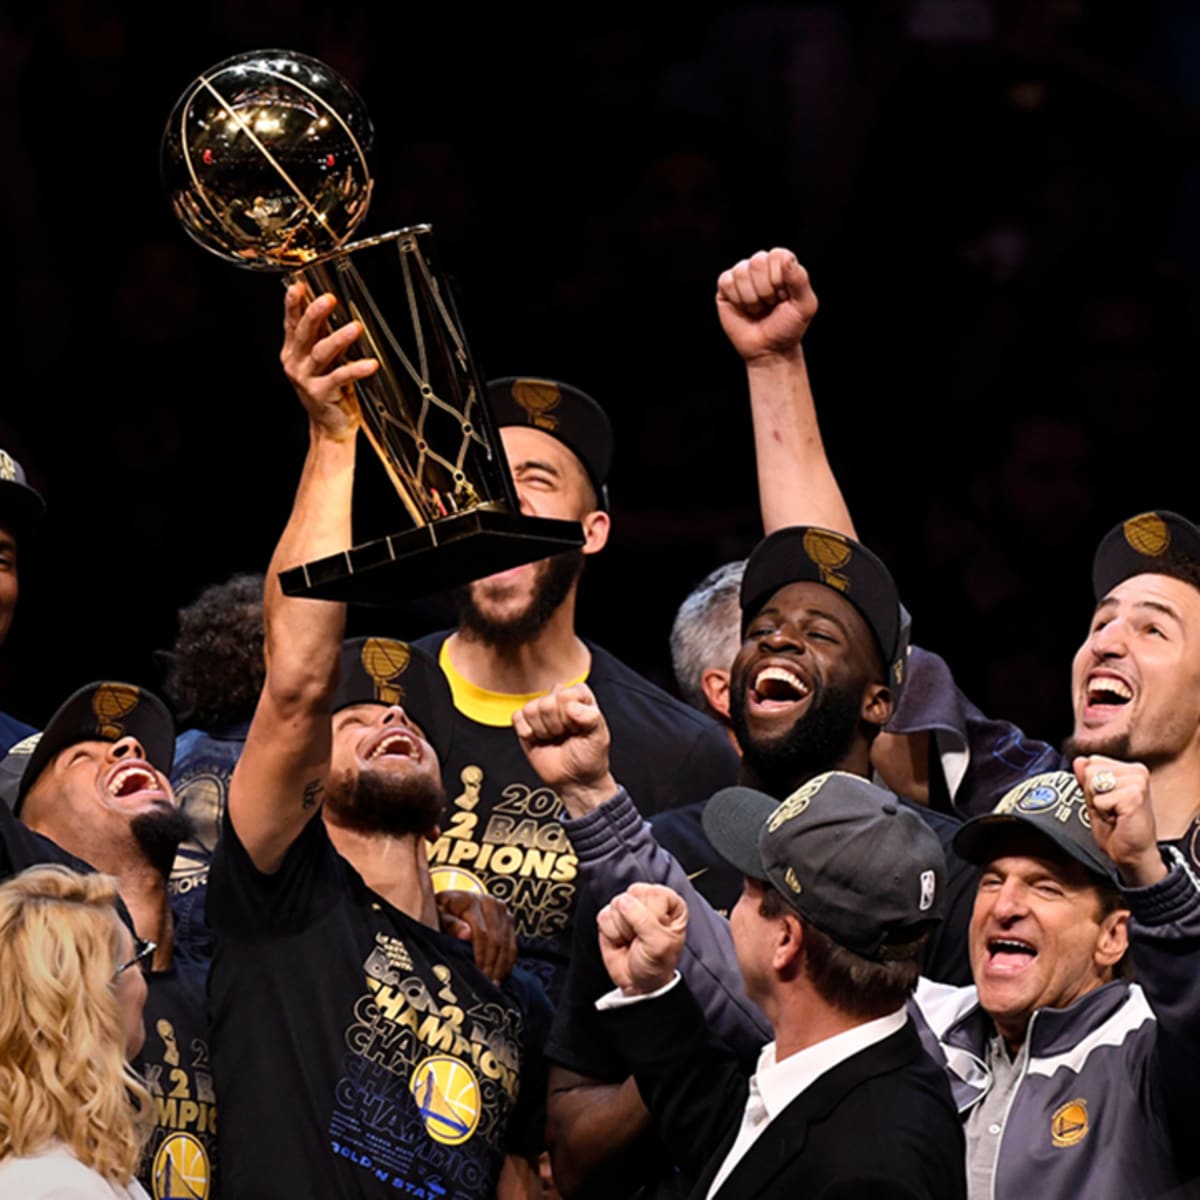 Golden State Warriors 2018 Back-to-Back NBA Champions 6-Player